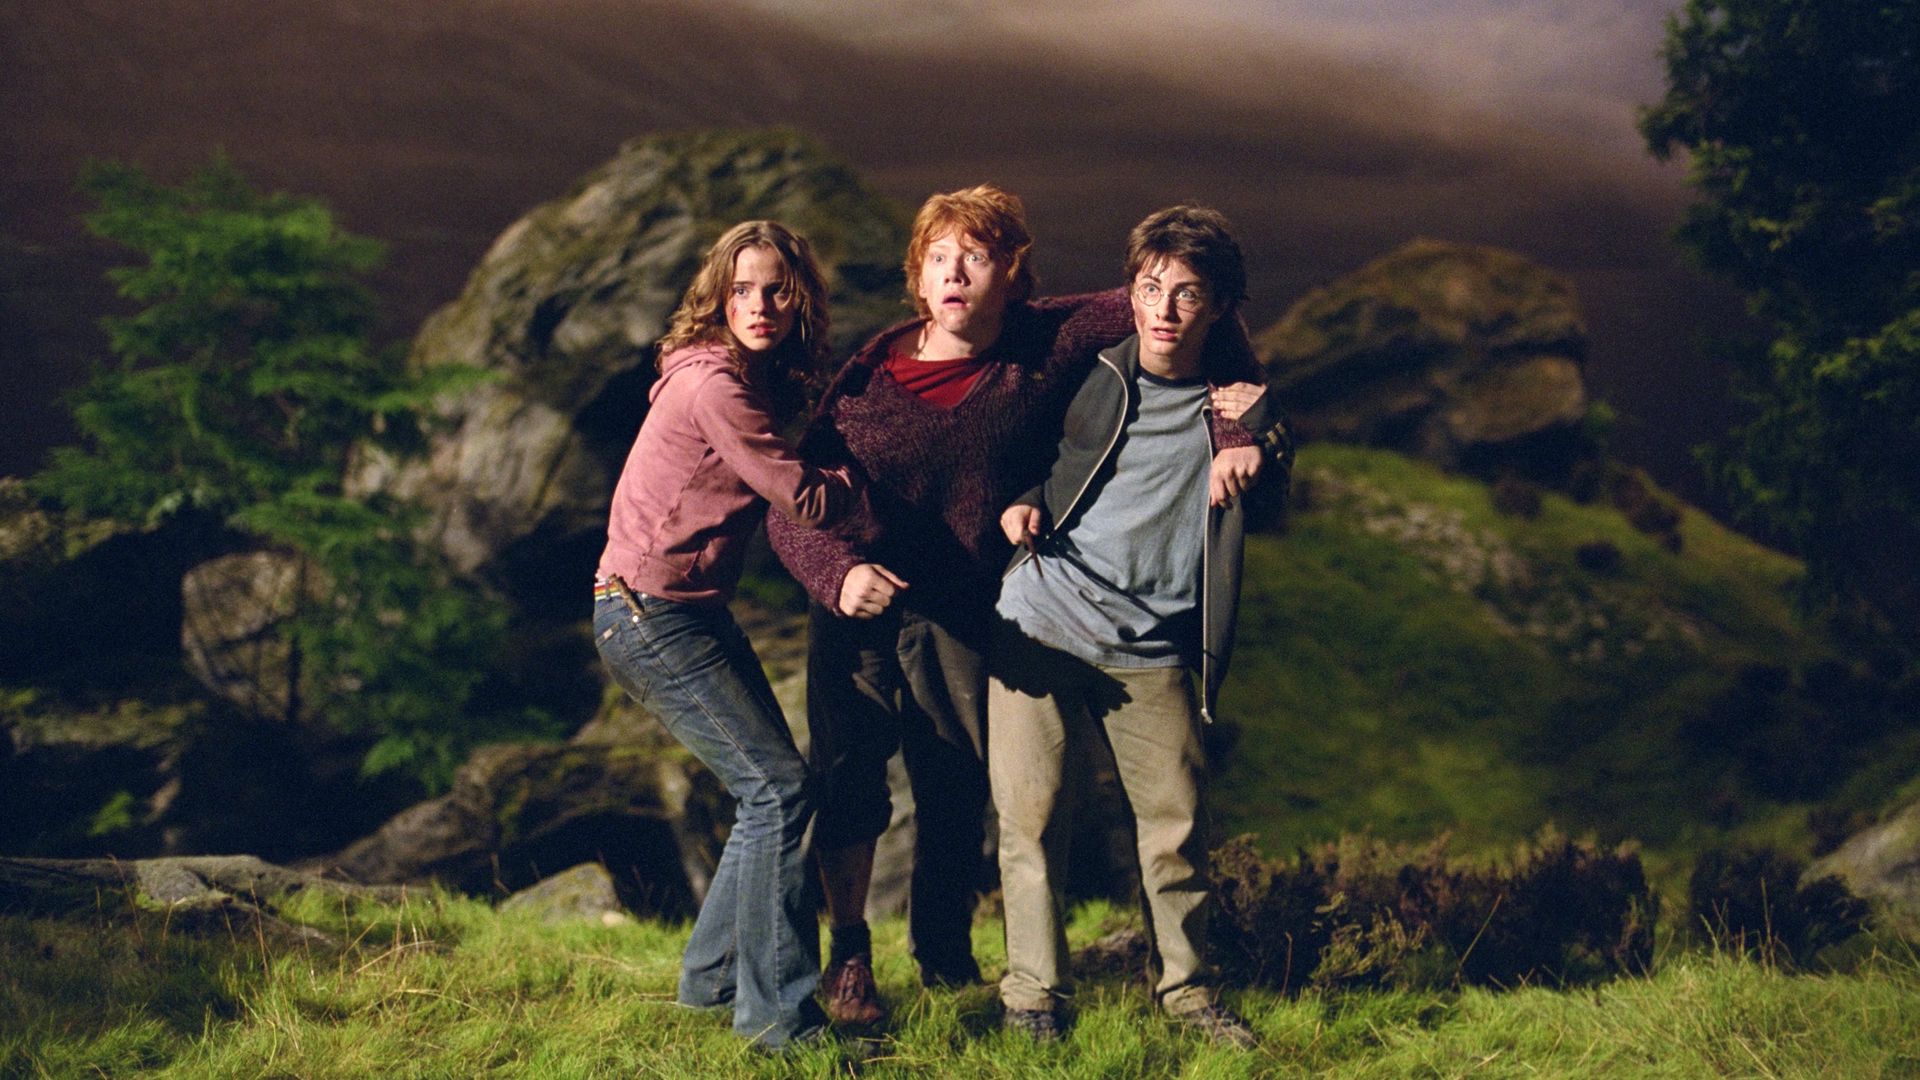 Where are the Harry Potter stars now?